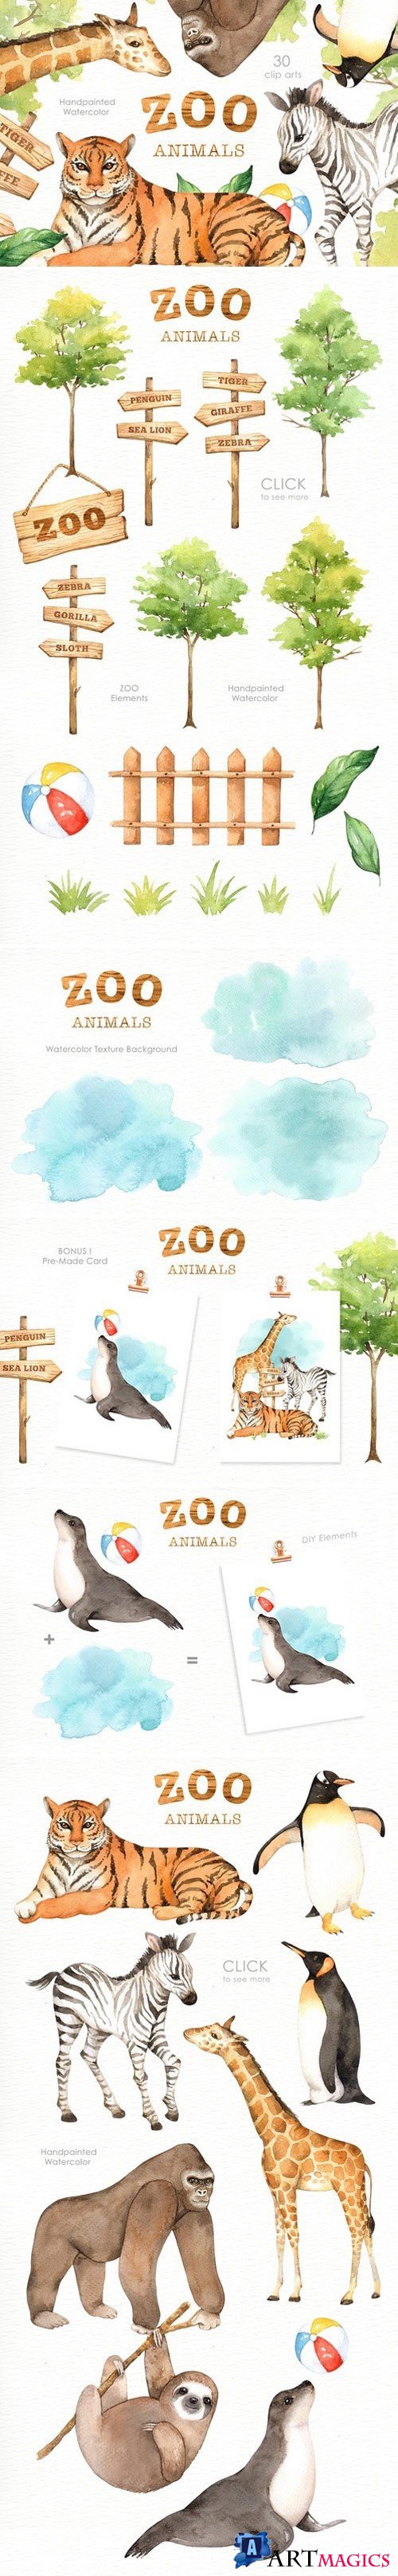 Zoo Animals Watercolor clipart 2401054